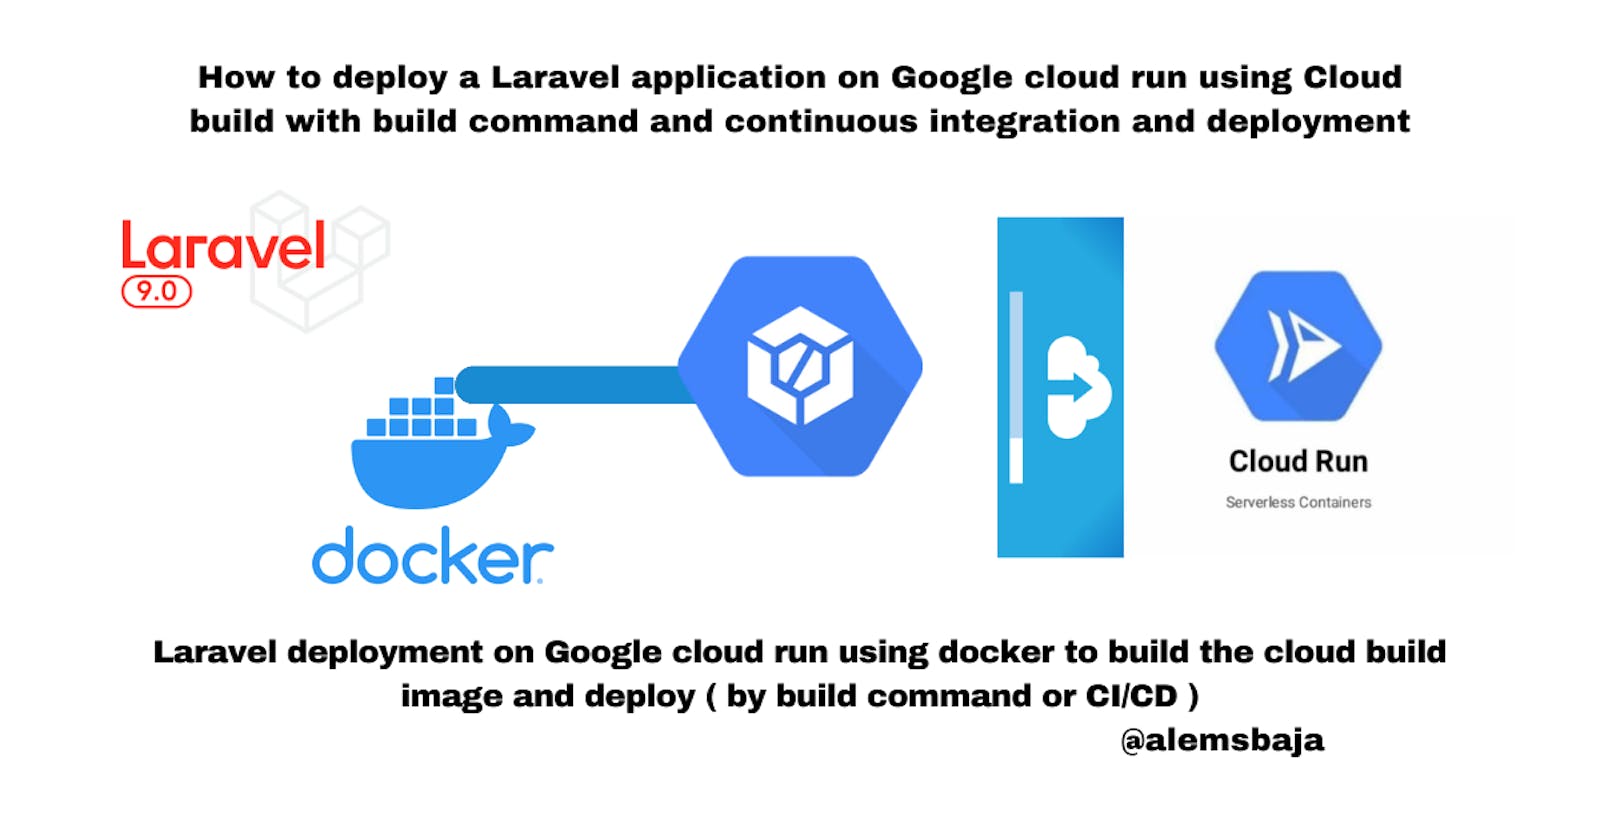 How to deploy a Laravel application on Google cloud run using Cloud build with build command, continuous integration and deployment